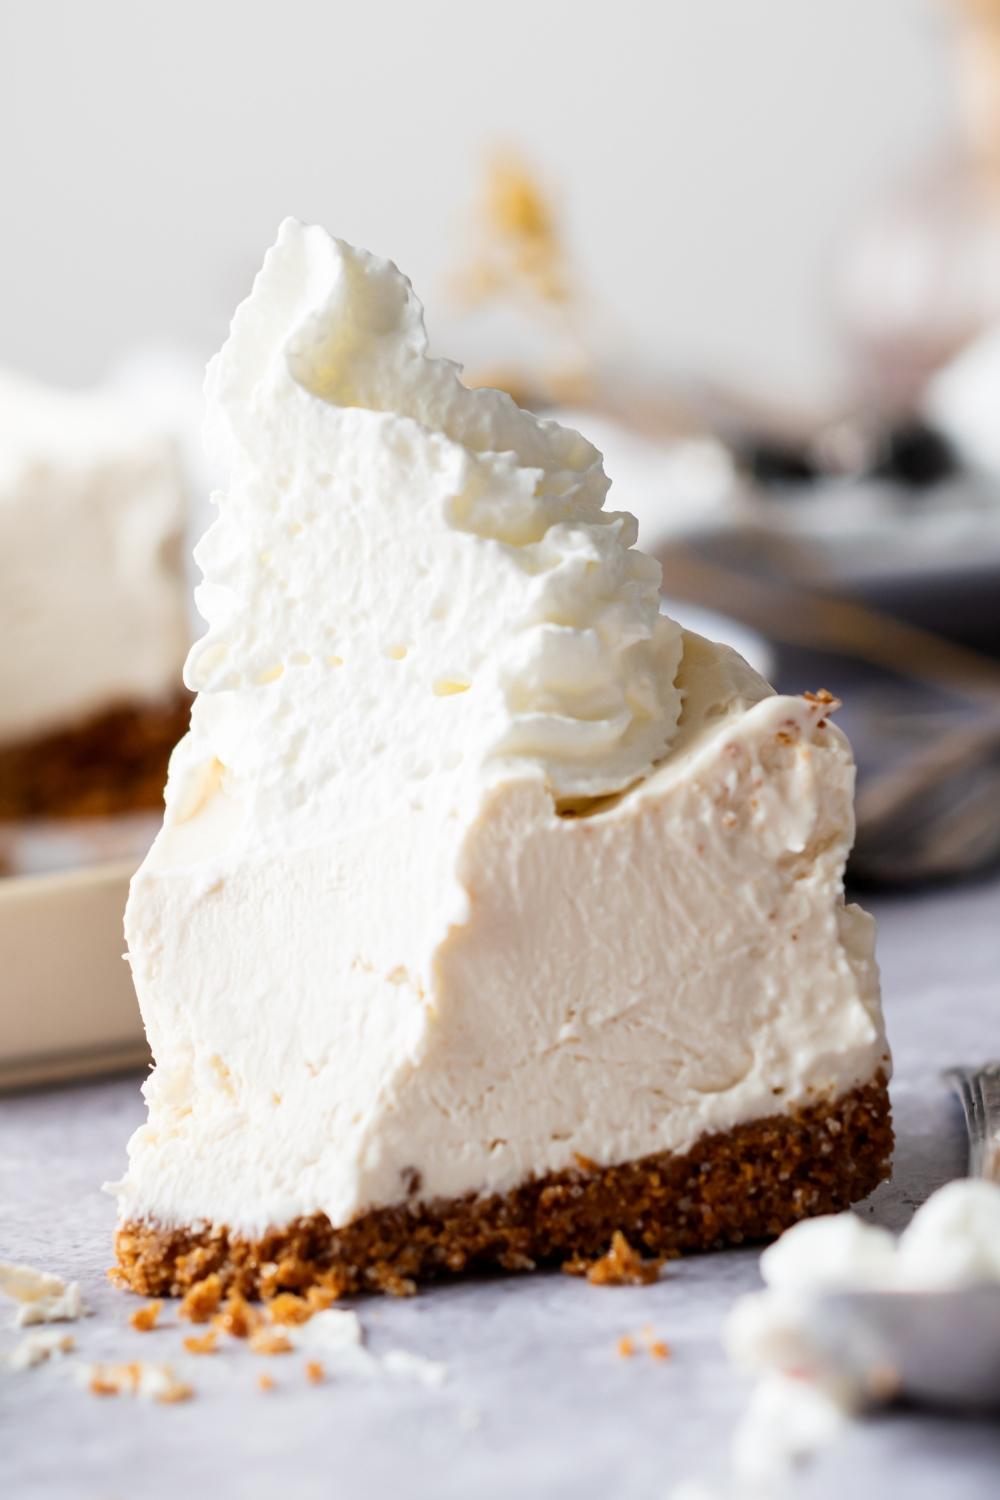 A slice of cheesecake with a dollop of whipped cream on top.